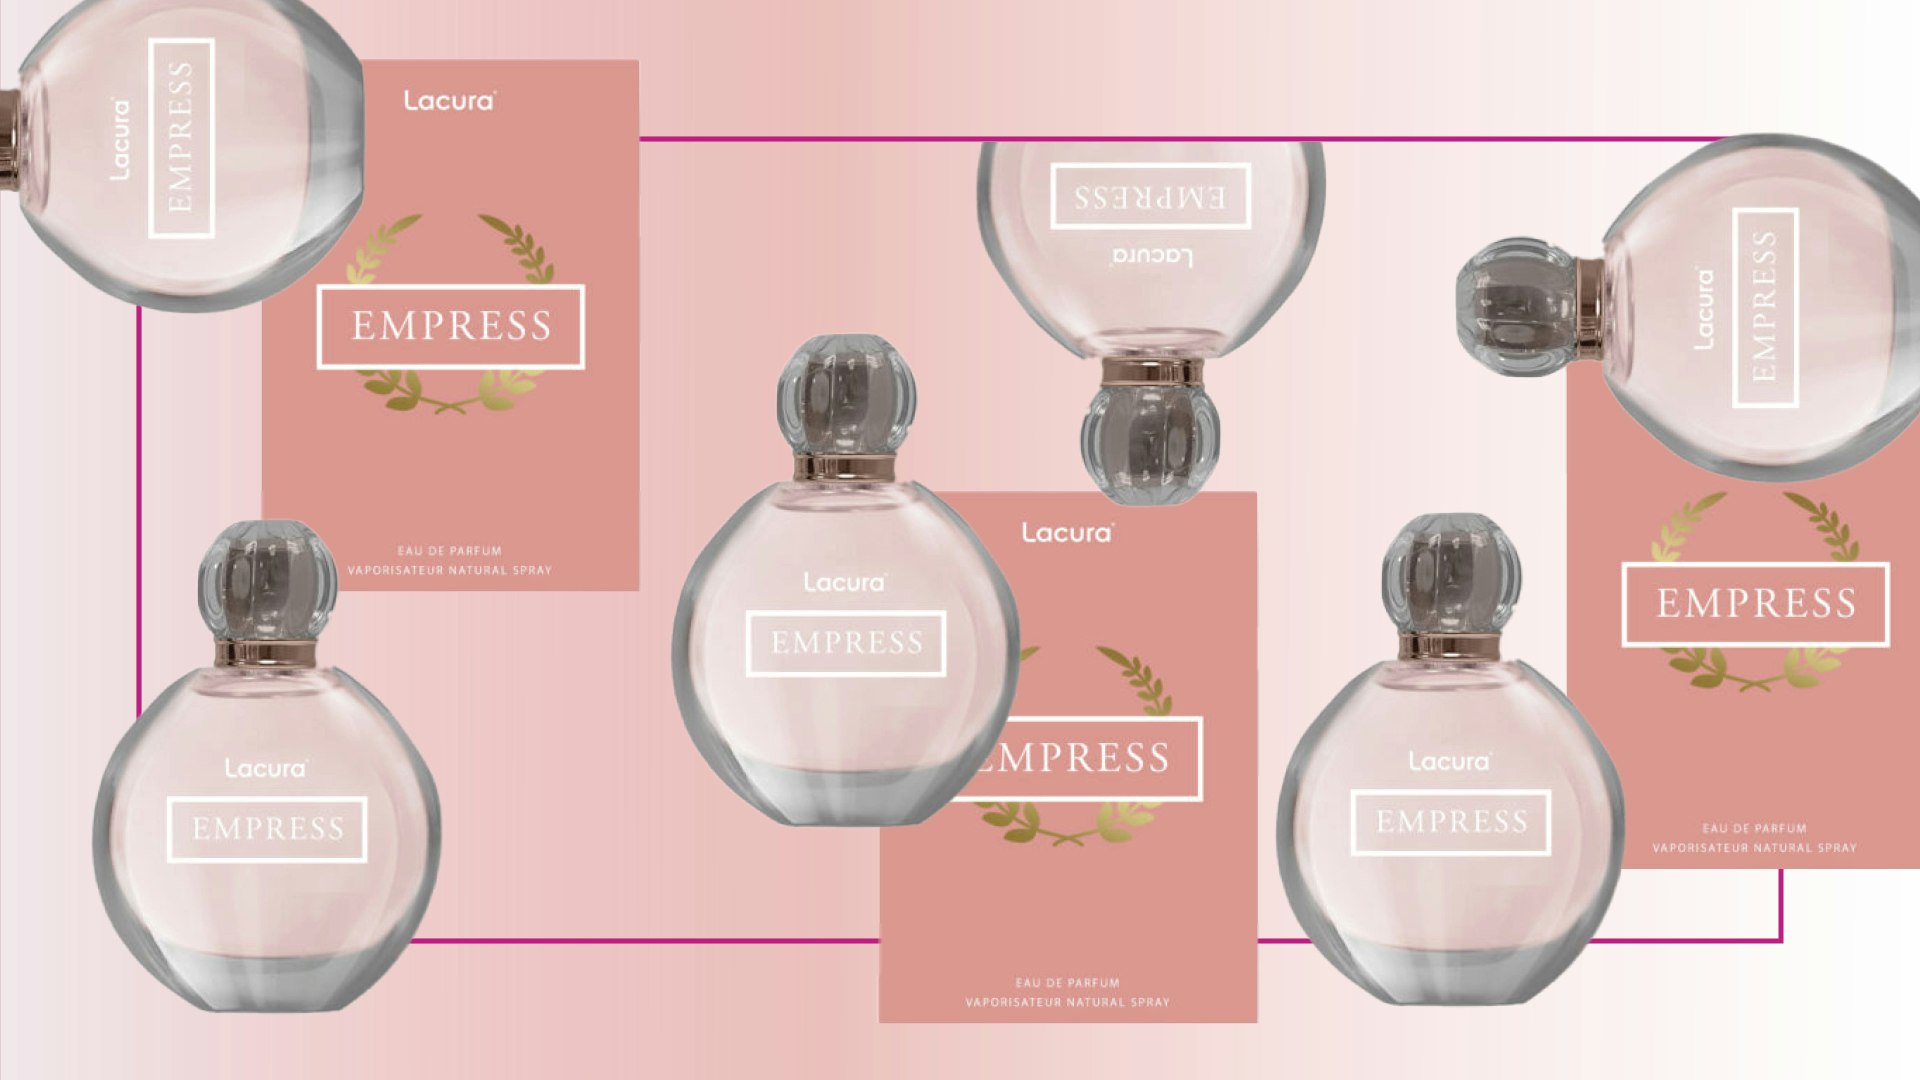 Aldi's new fragrance is a dupe for paco rabbane's olympéa | beauty & hair | grazia